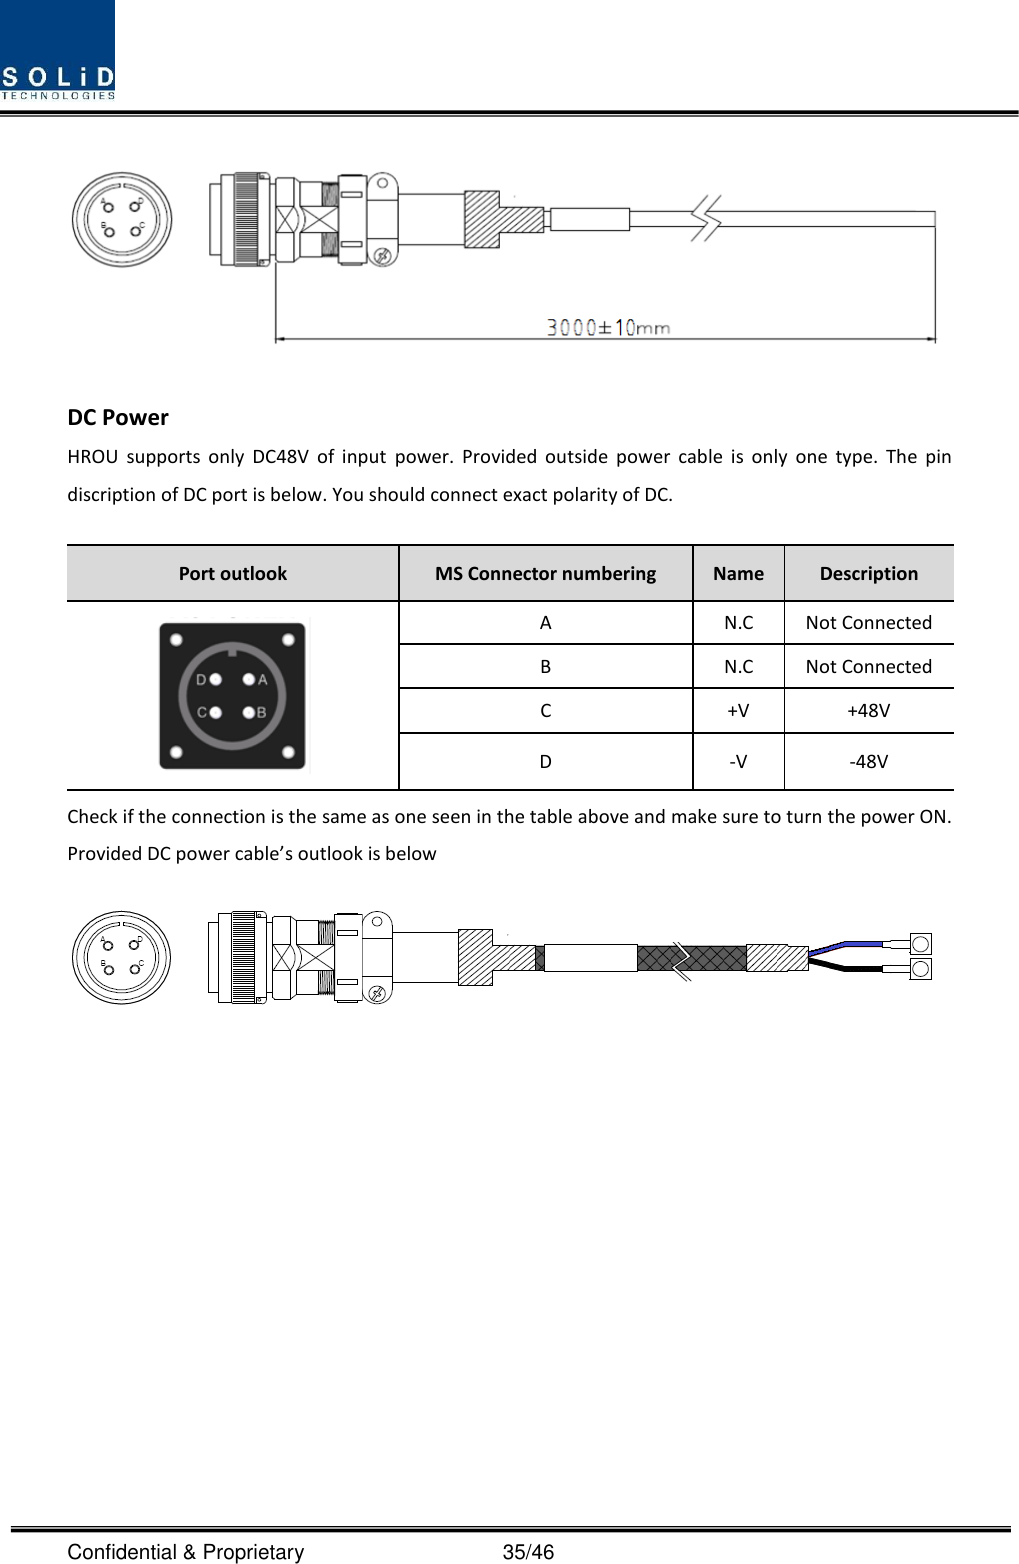  Confidential &amp; Proprietary                                      35/46  DC Power HROU  supports  only  DC48V  of  input  power.  Provided  outside  power  cable  is  only  one  type.  The  pin discription of DC port is below. You should connect exact polarity of DC.  Port outlook MS Connector numbering Name Description  A N.C Not Connected B N.C Not Connected C +V +48V D -V -48V Check if the connection is the same as one seen in the table above and make sure to turn the power ON. Provided DC power cable’s outlook is below    